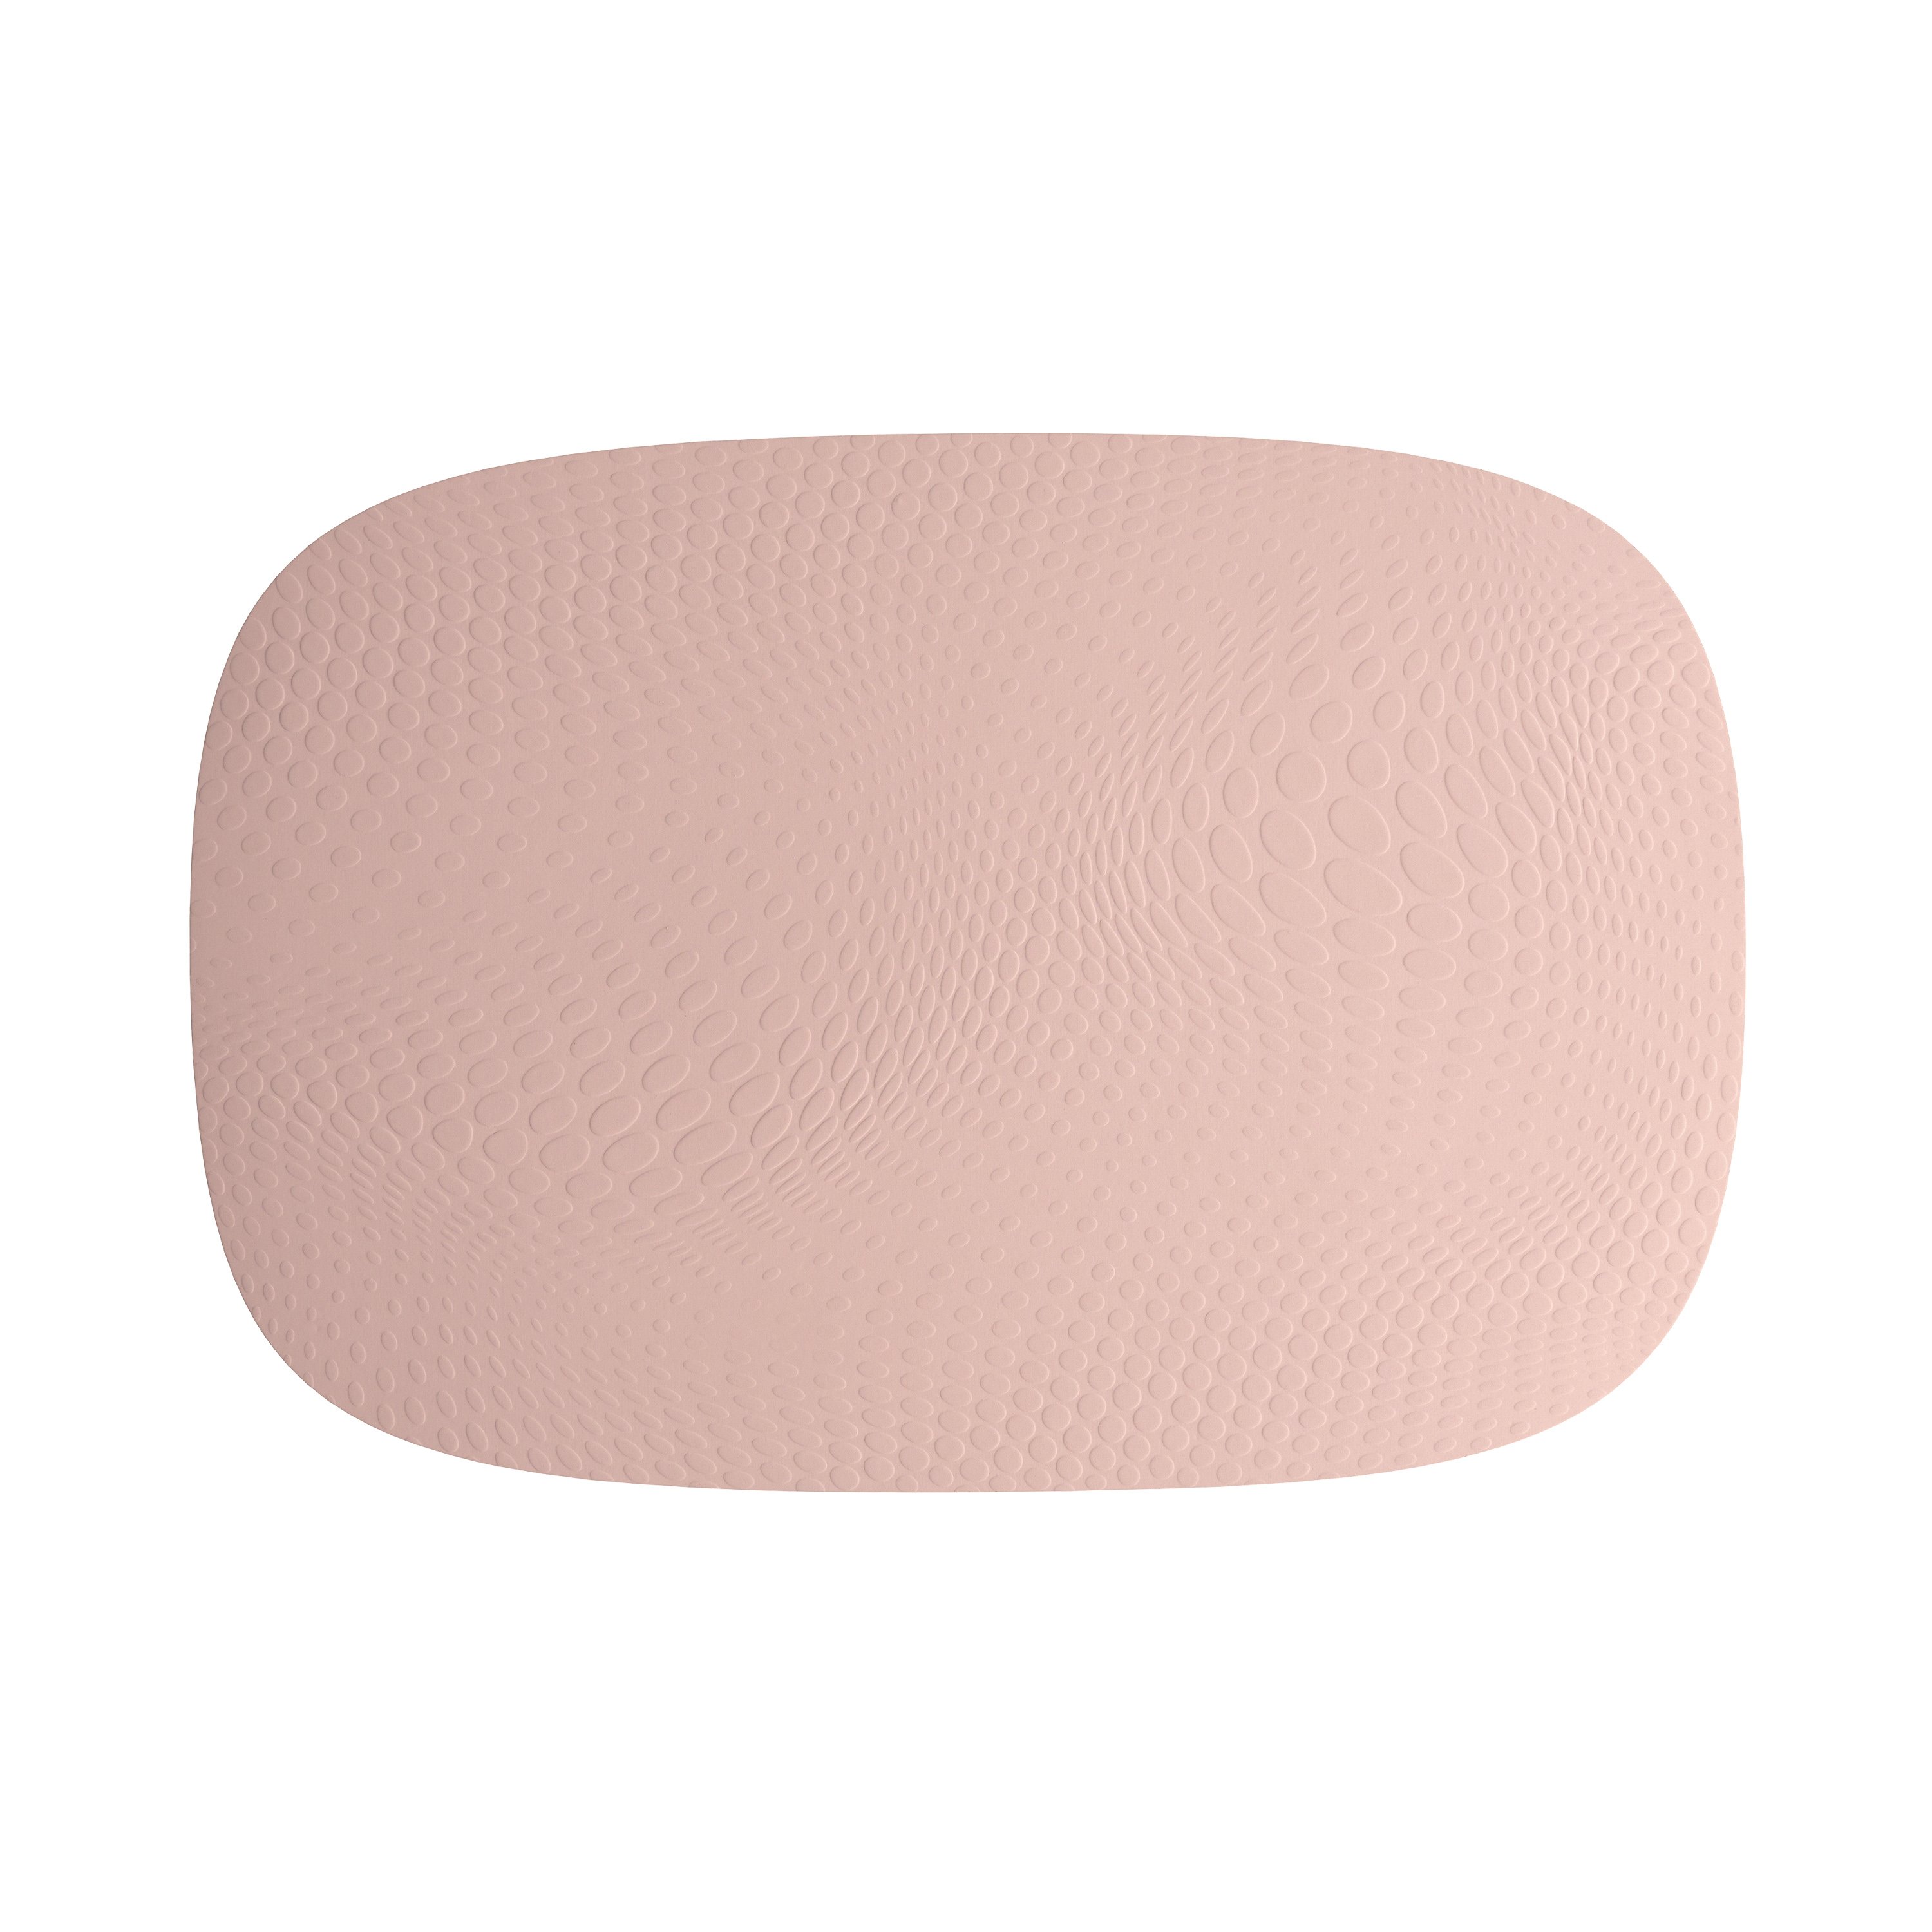 Aida - Karim Rashid - Candy Floss placemat 95% recycled leather (13602)